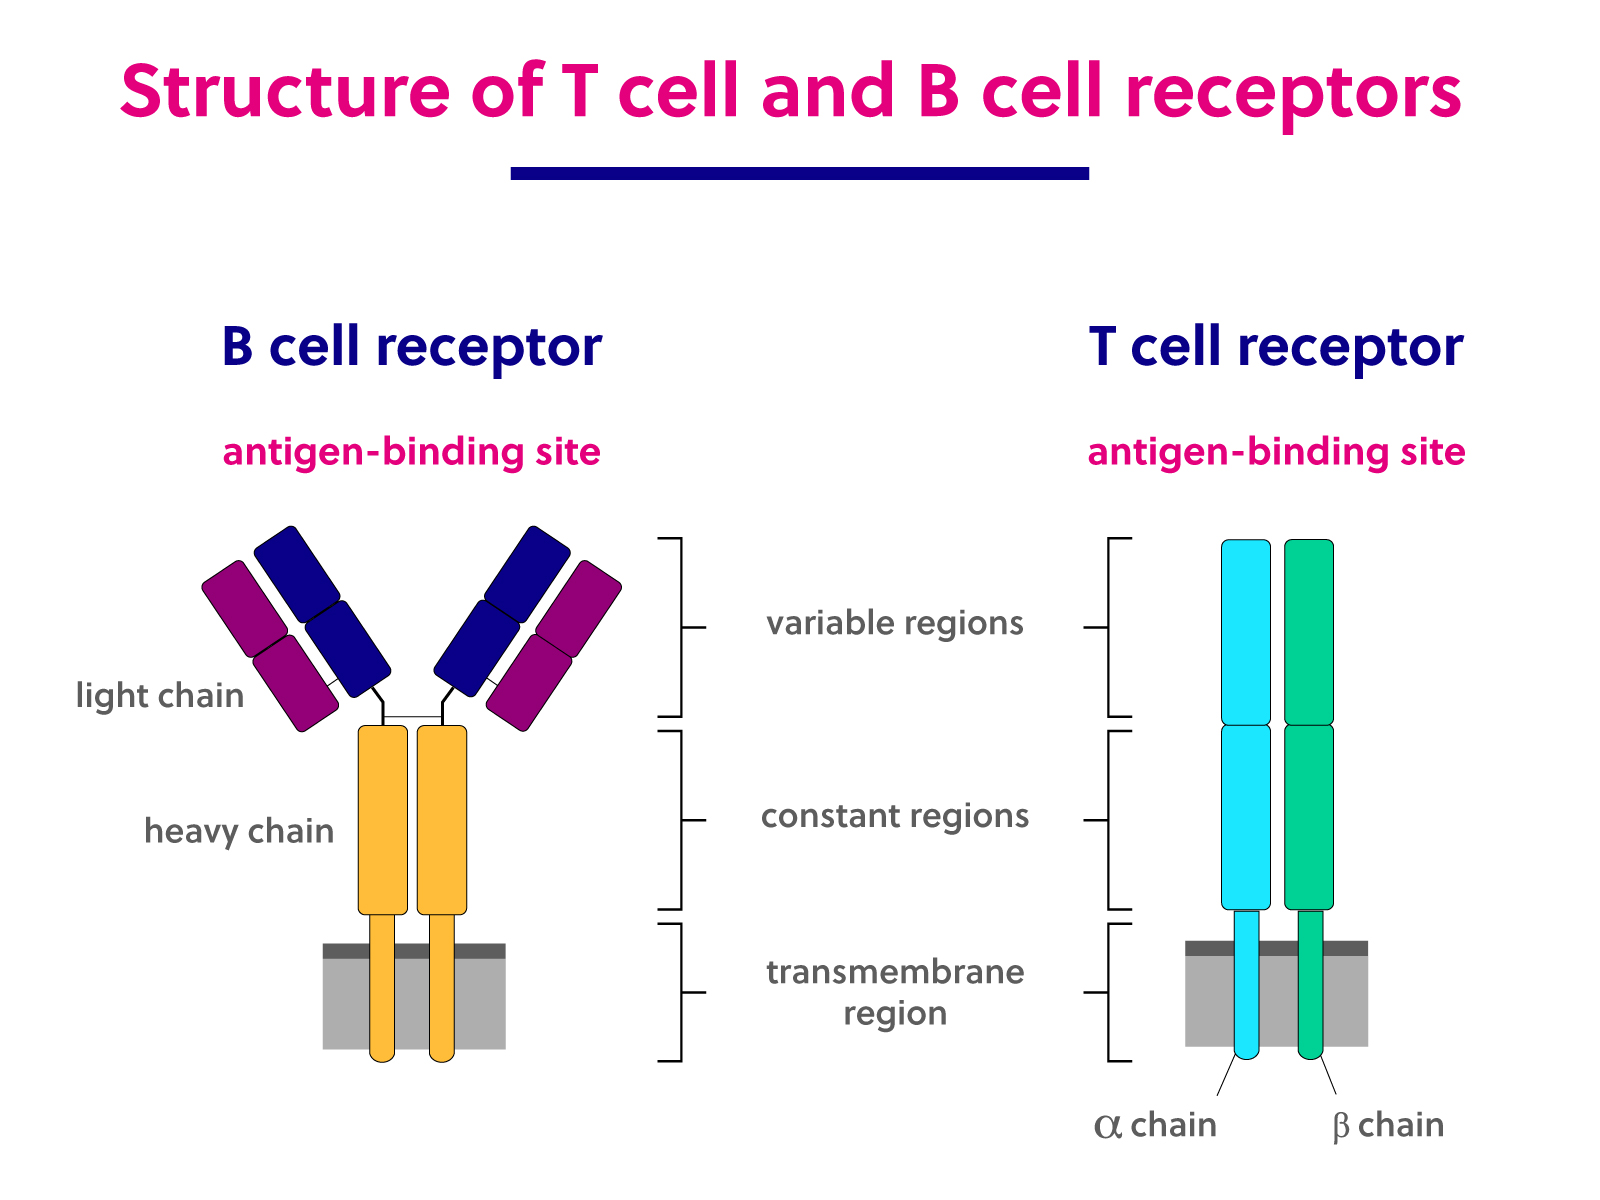 compare and contrast b cells and t cells